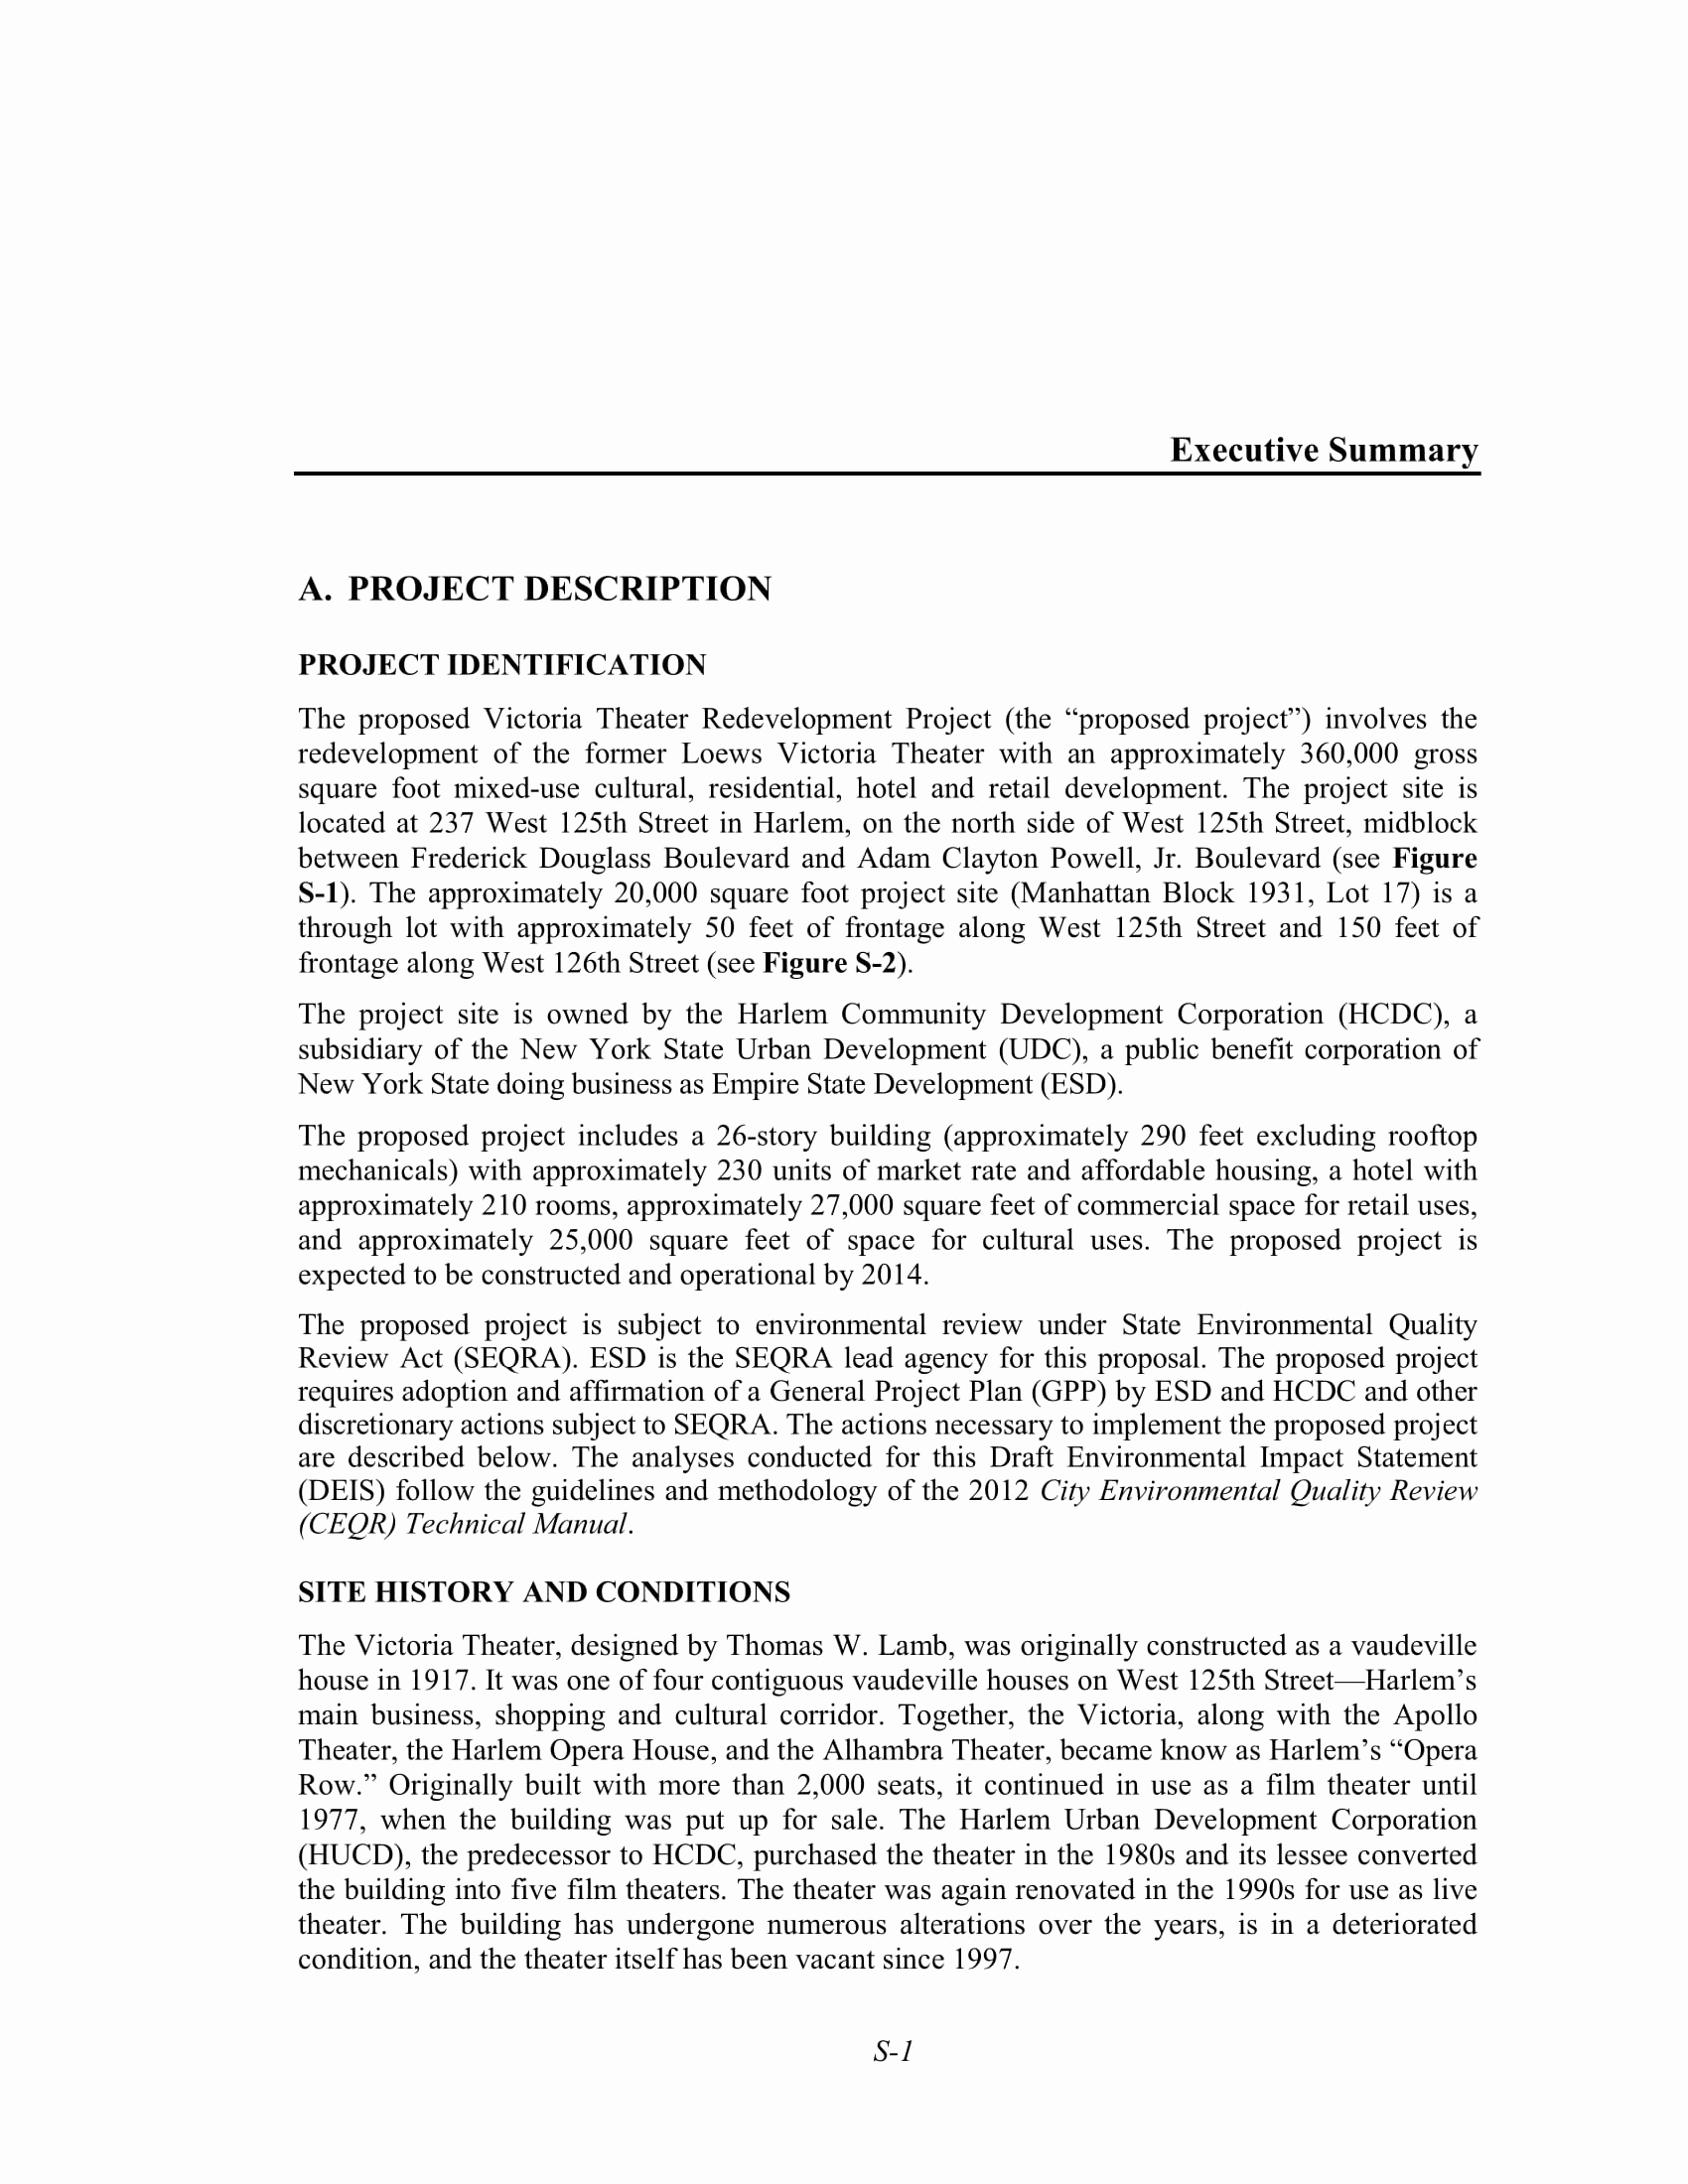 Executive Summary Sample for Proposal New 10 Proposal Executive Summary Examples Pdf Word